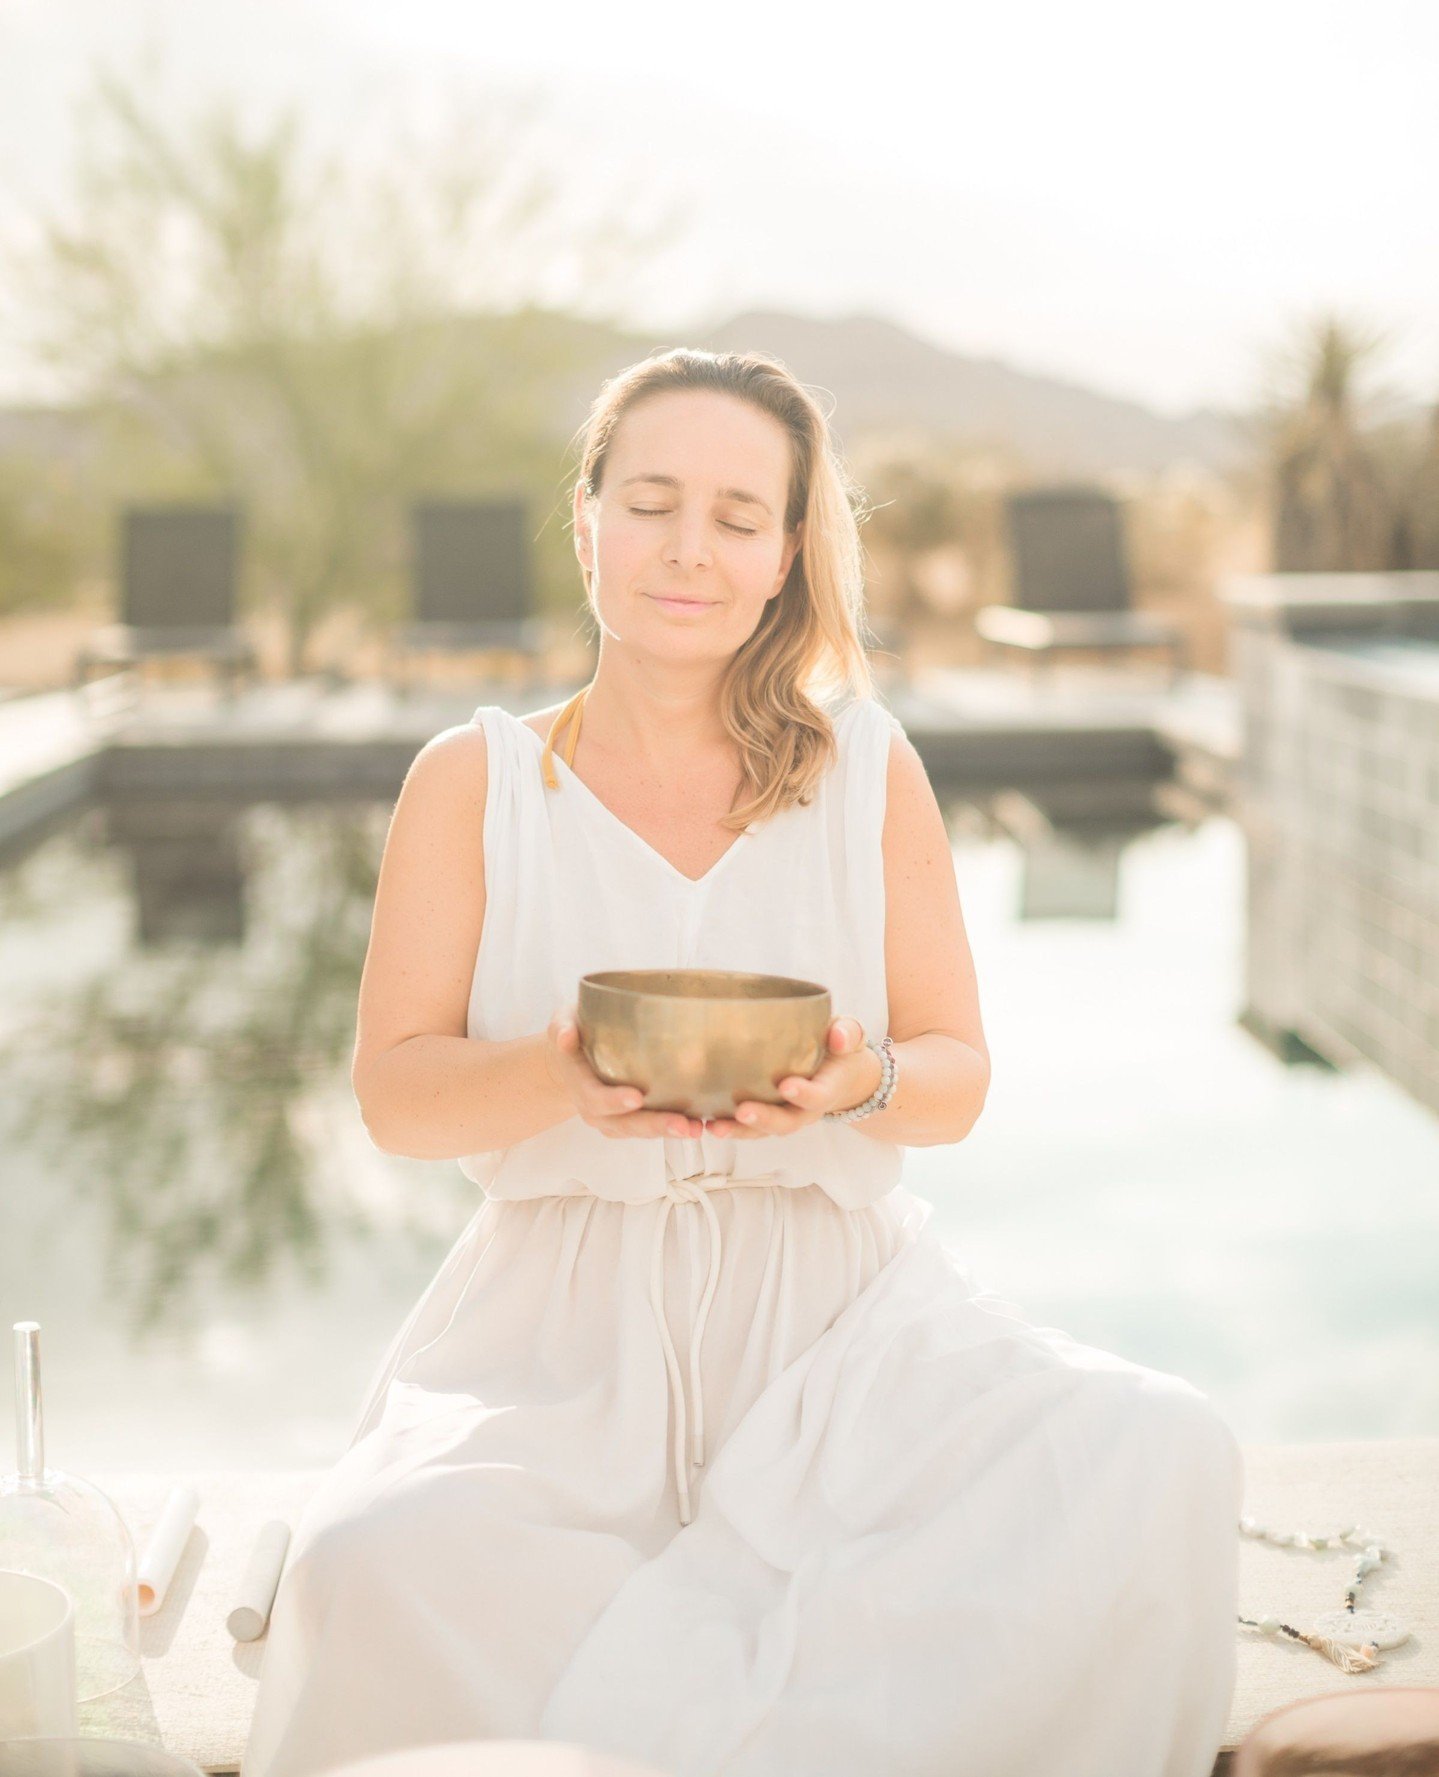 Why attend a wellness retreat? Here are a few reasons:⁠
⁠
✨️ Discover your purpose⁠
✨️ Recharge your mind, body, and spirit⁠
✨️ Learn new stillness skills to apply when you return⁠
✨️ Create positive change in your life⁠
✨️ Increase your self awarene